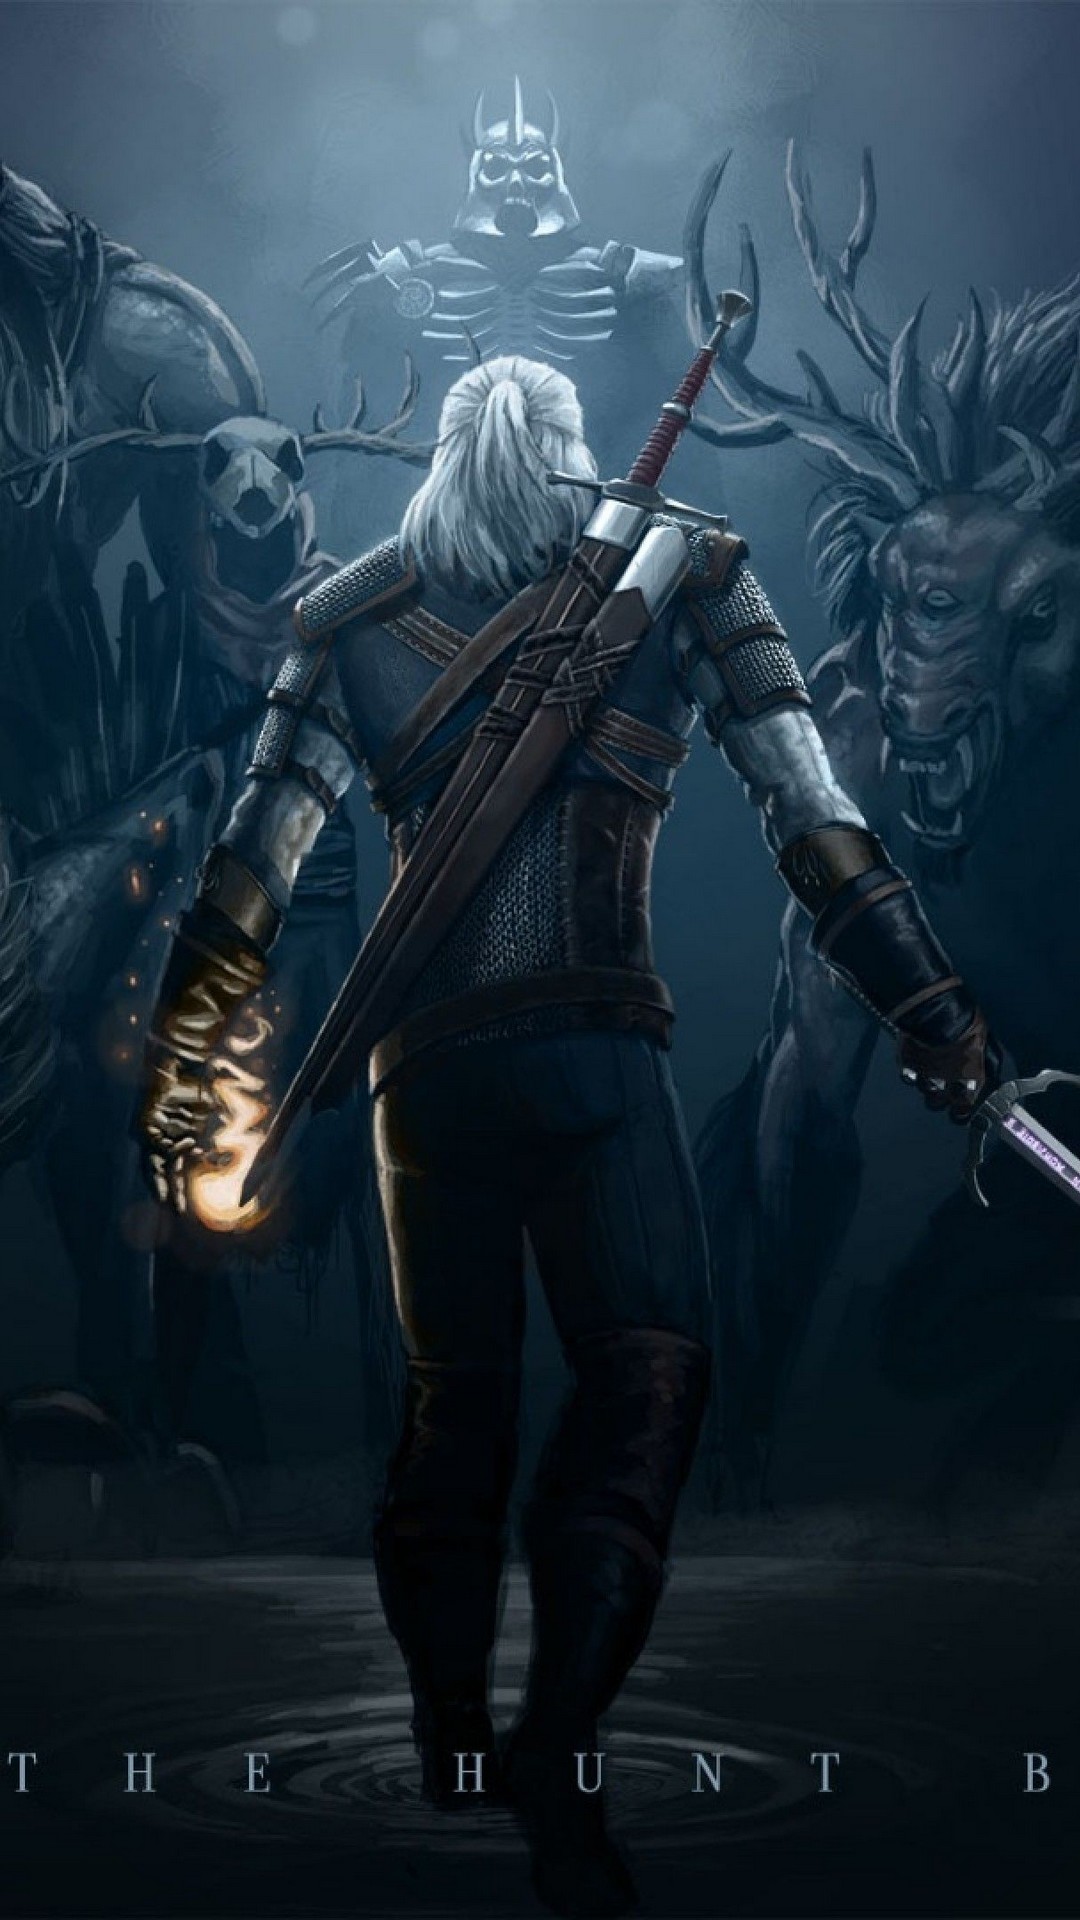 The Witcher iPhone 7 Wallpaper with high-resolution 1080x1920 pixel. You can use this wallpaper for your iPhone 5, 6, 7, 8, X, XS, XR backgrounds, Mobile Screensaver, or iPad Lock Screen